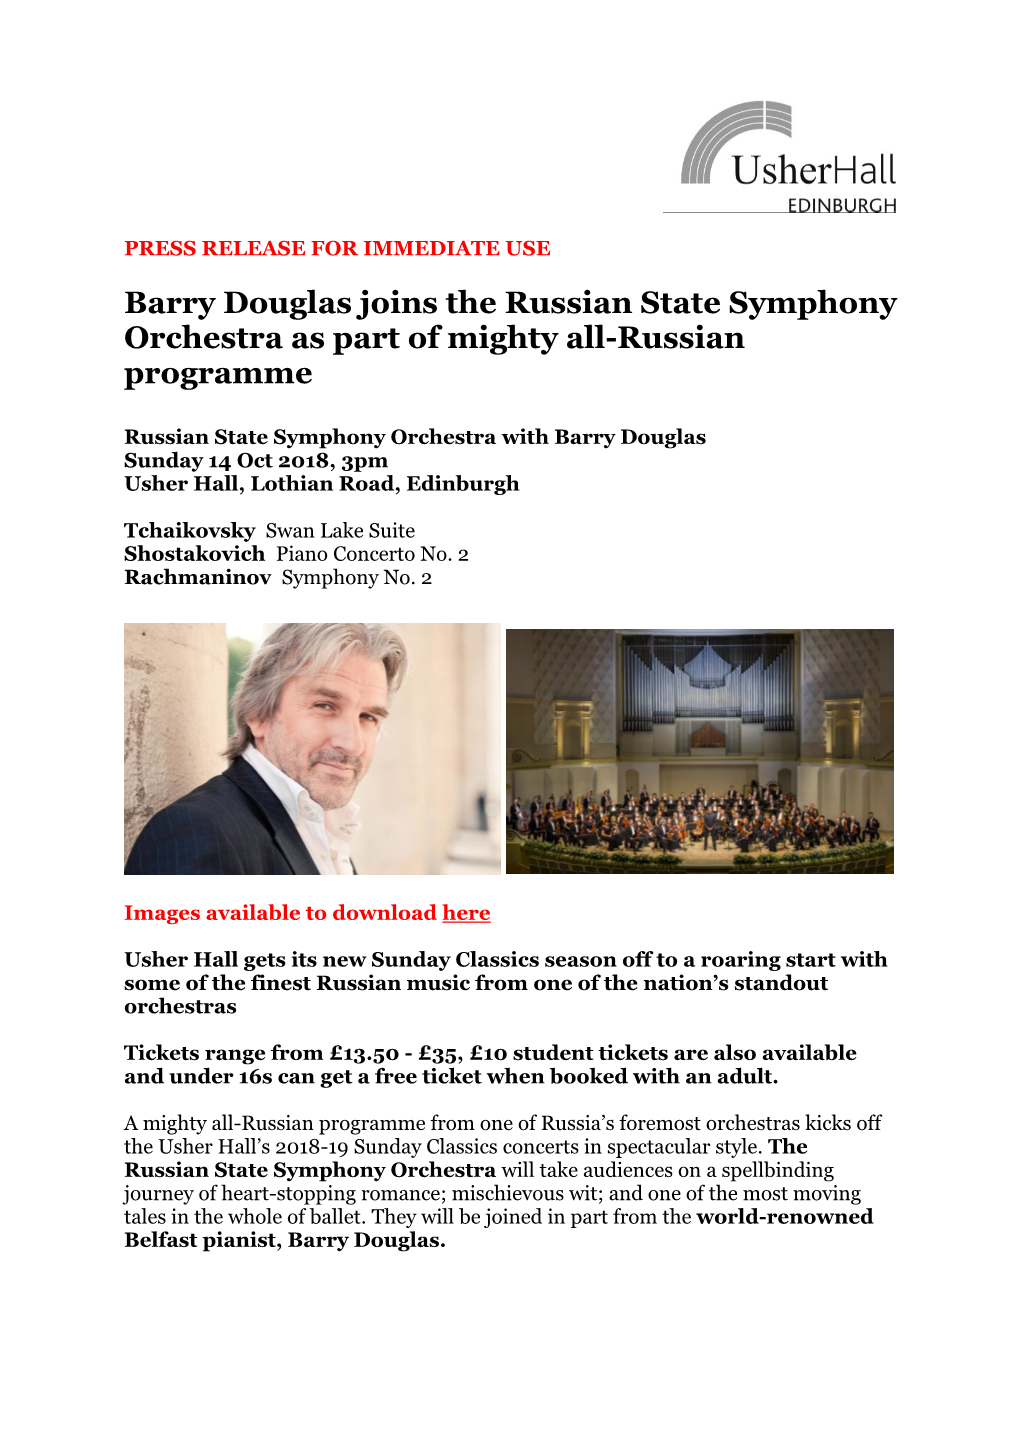 Barry Douglas Joins the Russian State Symphony Orchestra As Part of Mighty All-Russian Programme